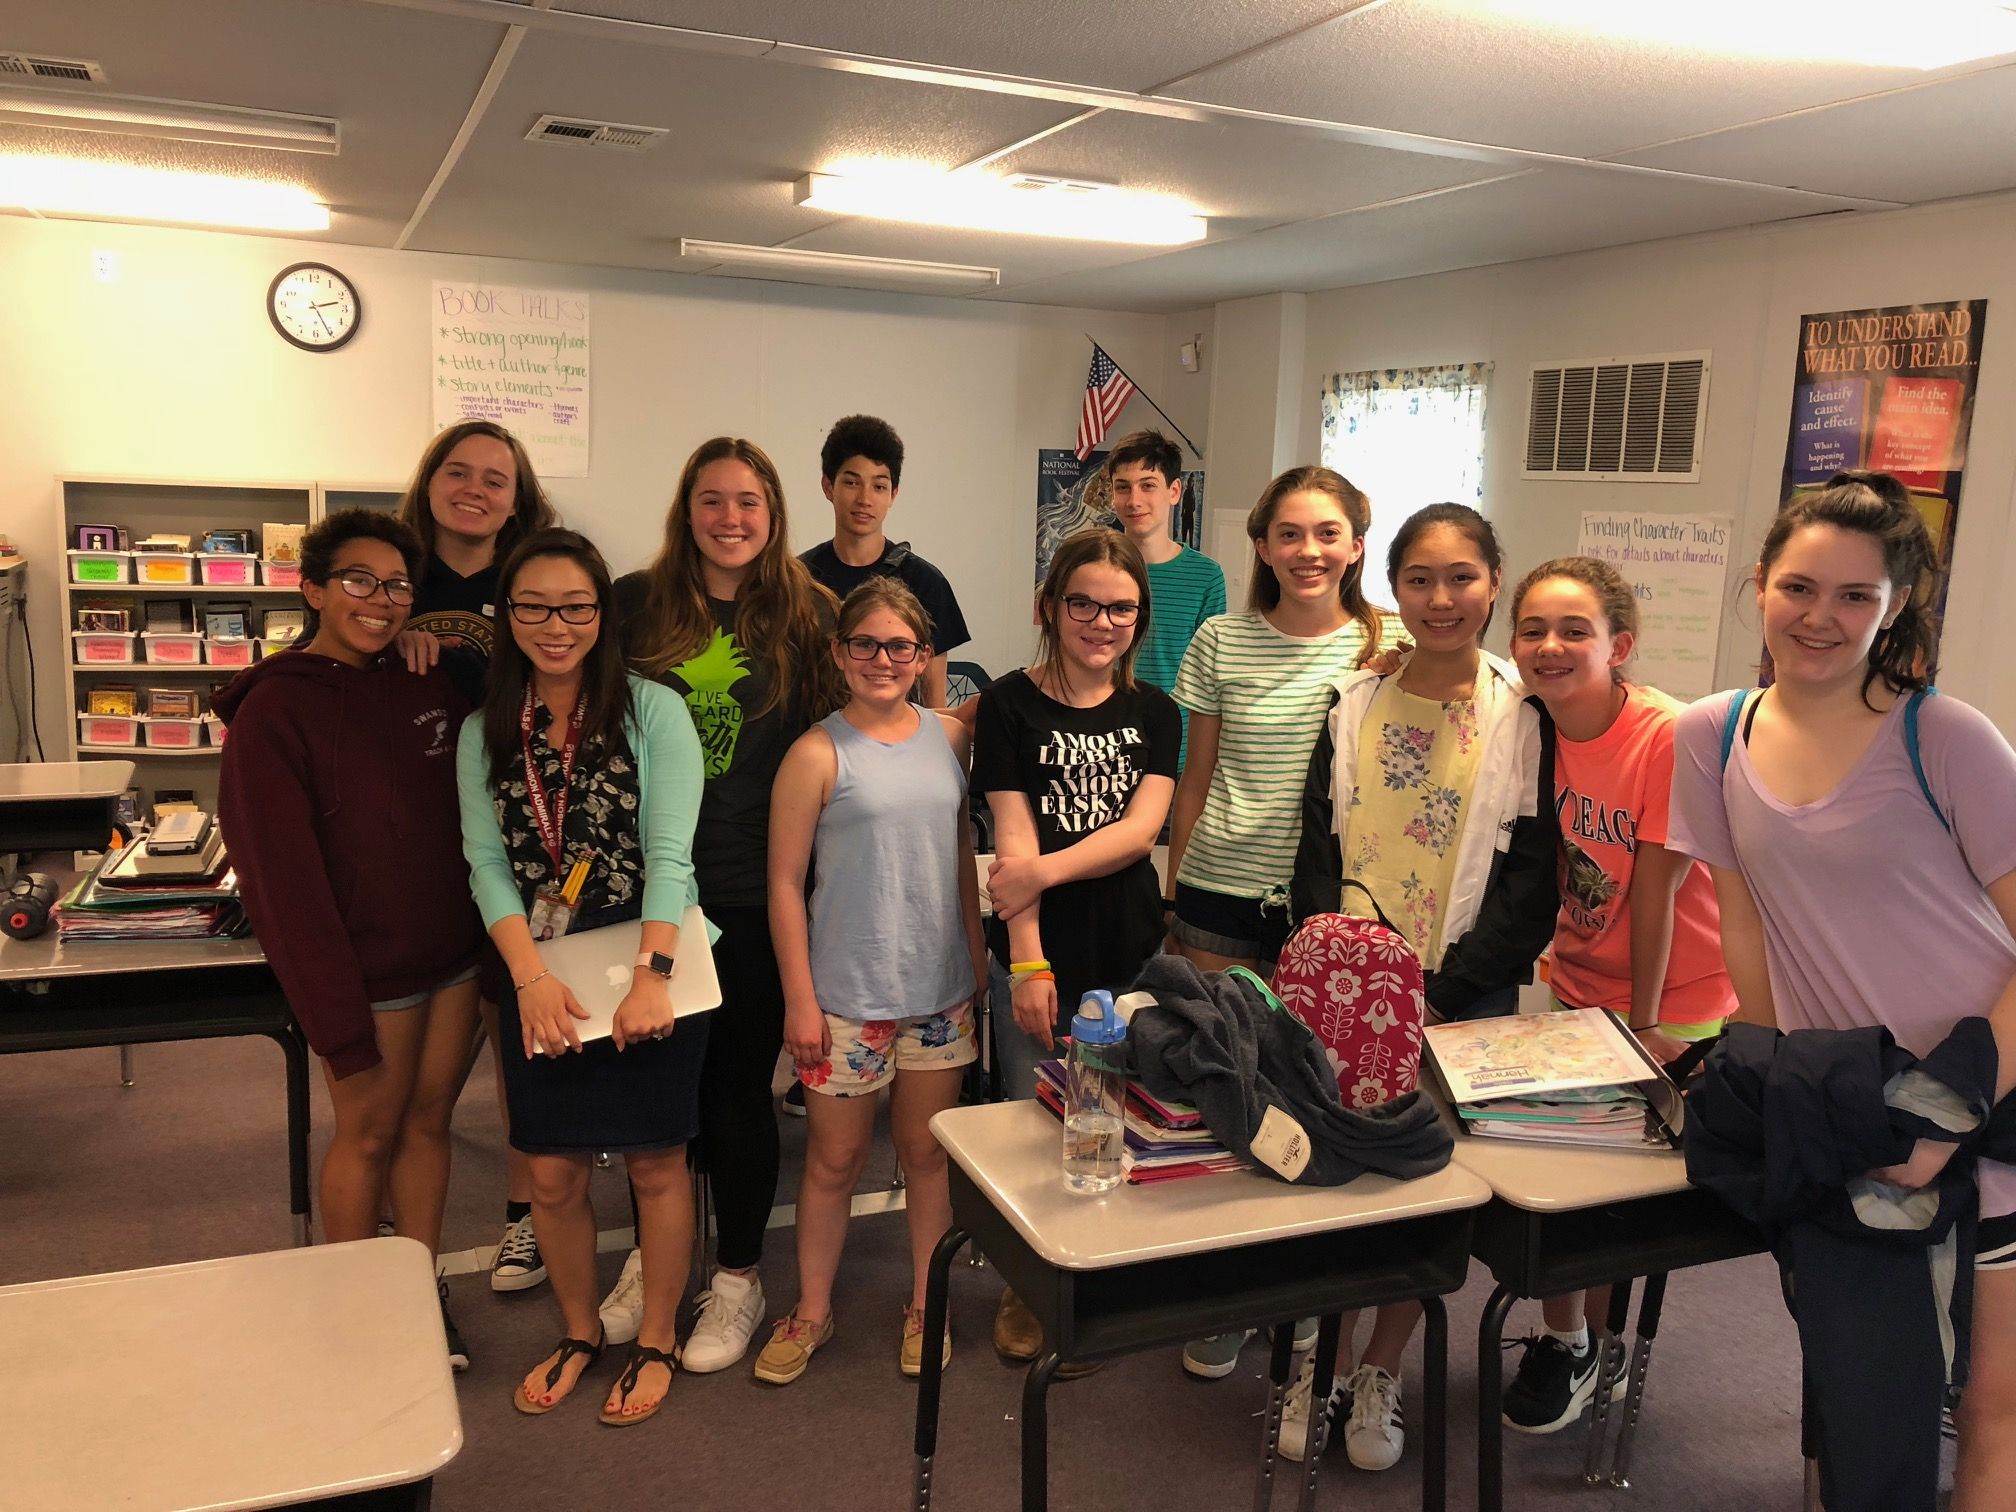 Ms. Rachael Behrens and members of the Swanson Middle School journalism class. Image by Kem Knapp Sawyer. United States, 2018.